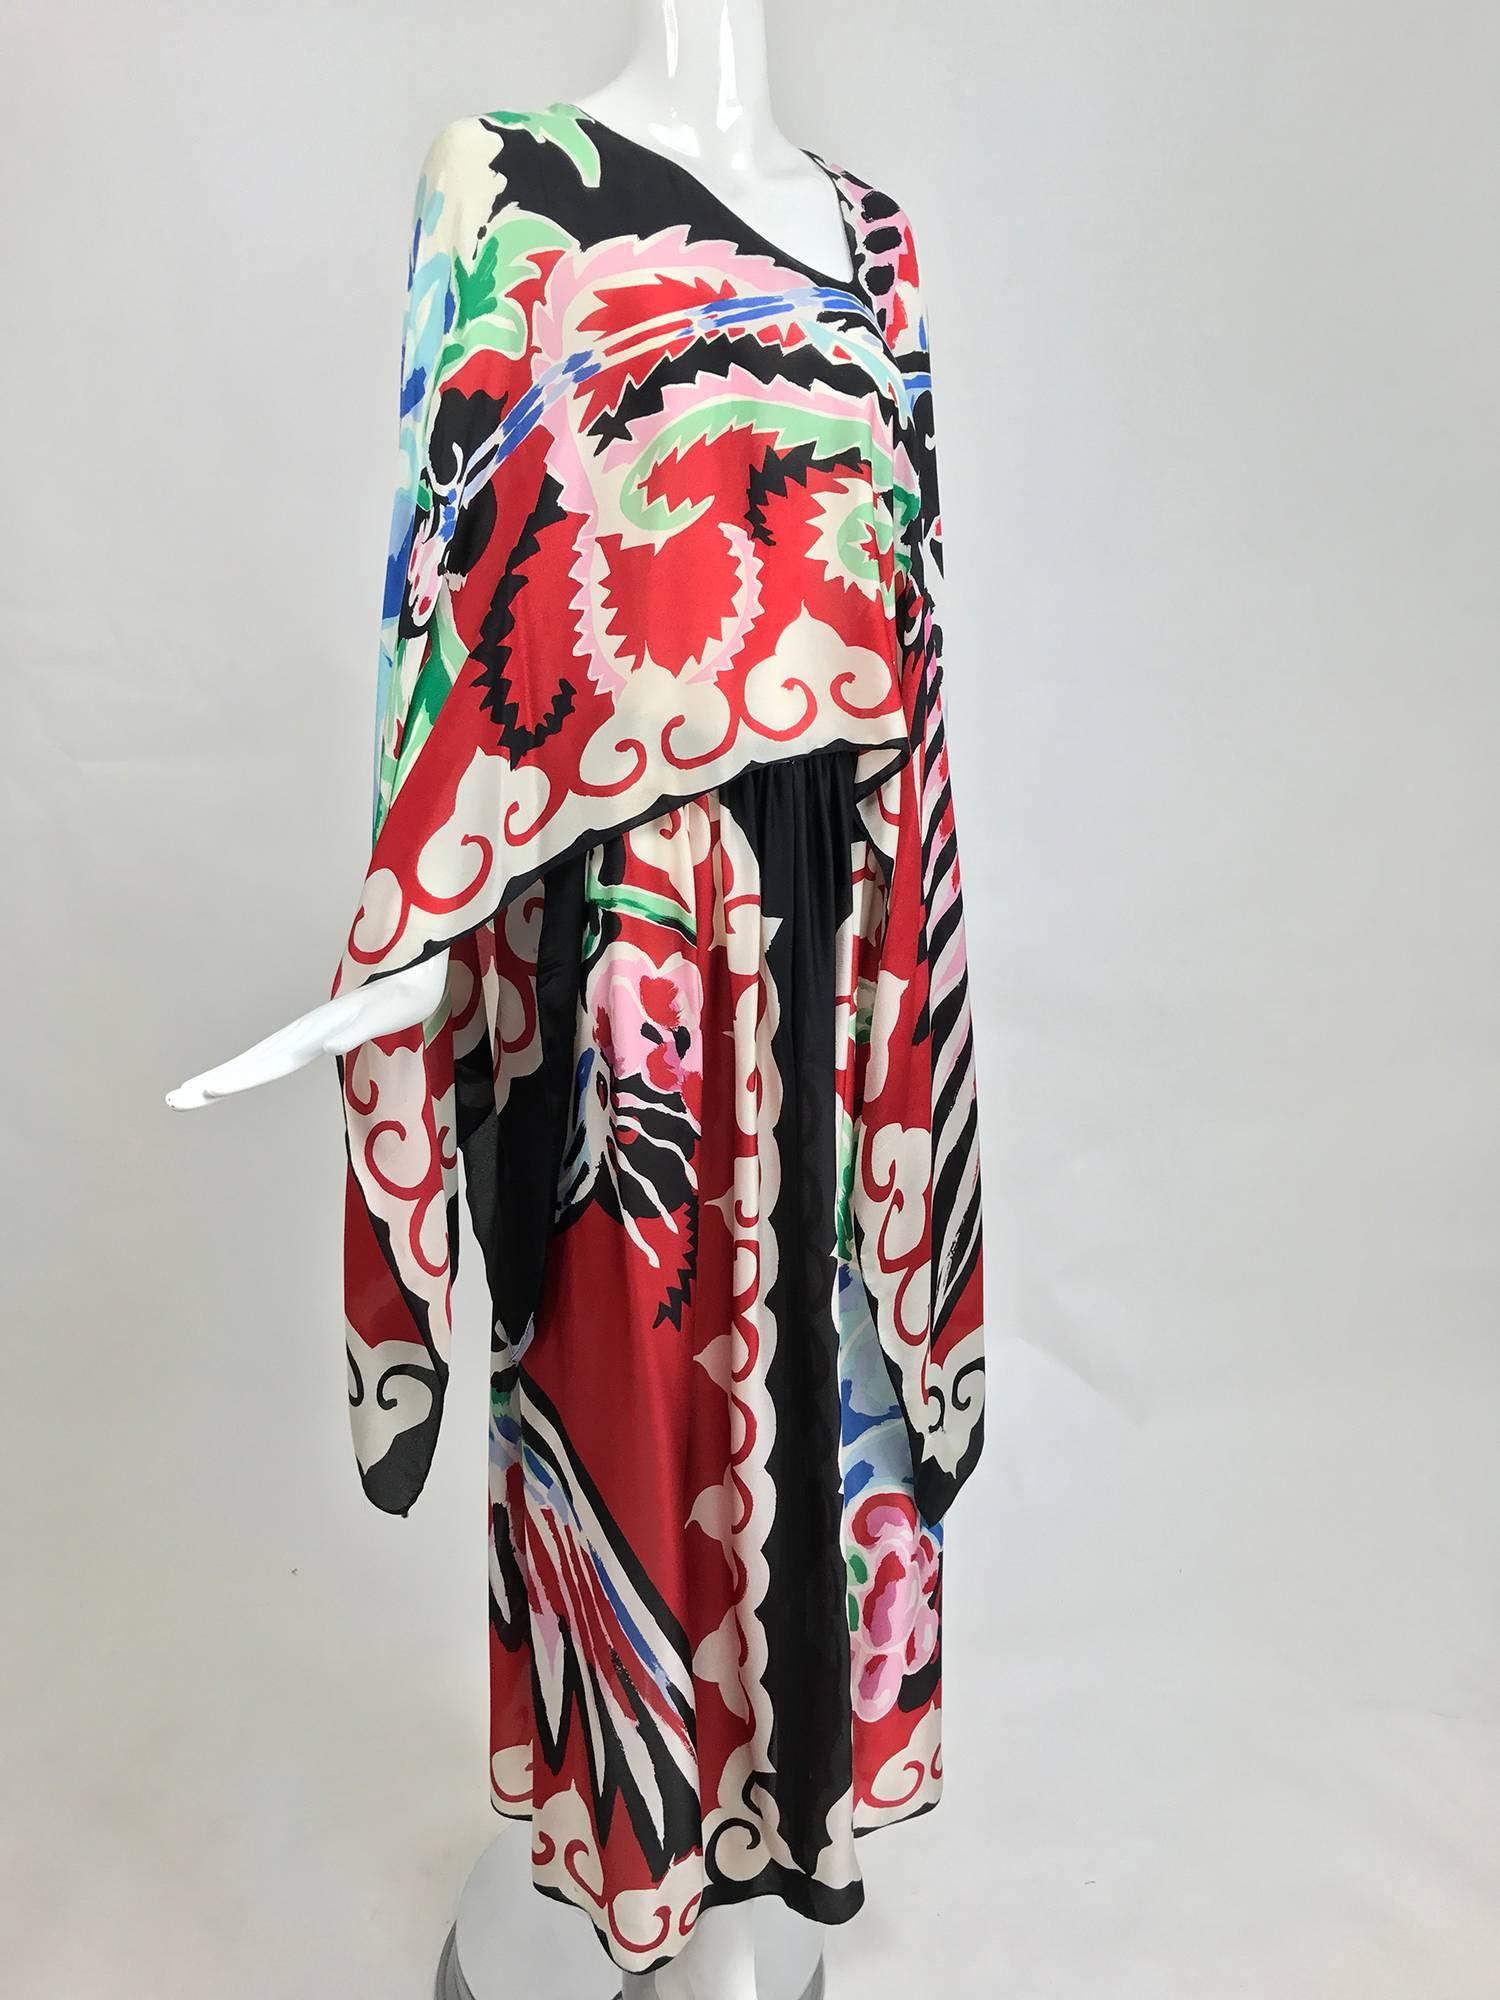 We are offering this amazing Michaele Vollbracht silk print dress which is constructed of  a cape top with attached maxi skirt...This dress, with an additional matching cape, is in the collection of the Metropolitan Museum...It's a vibrant print of